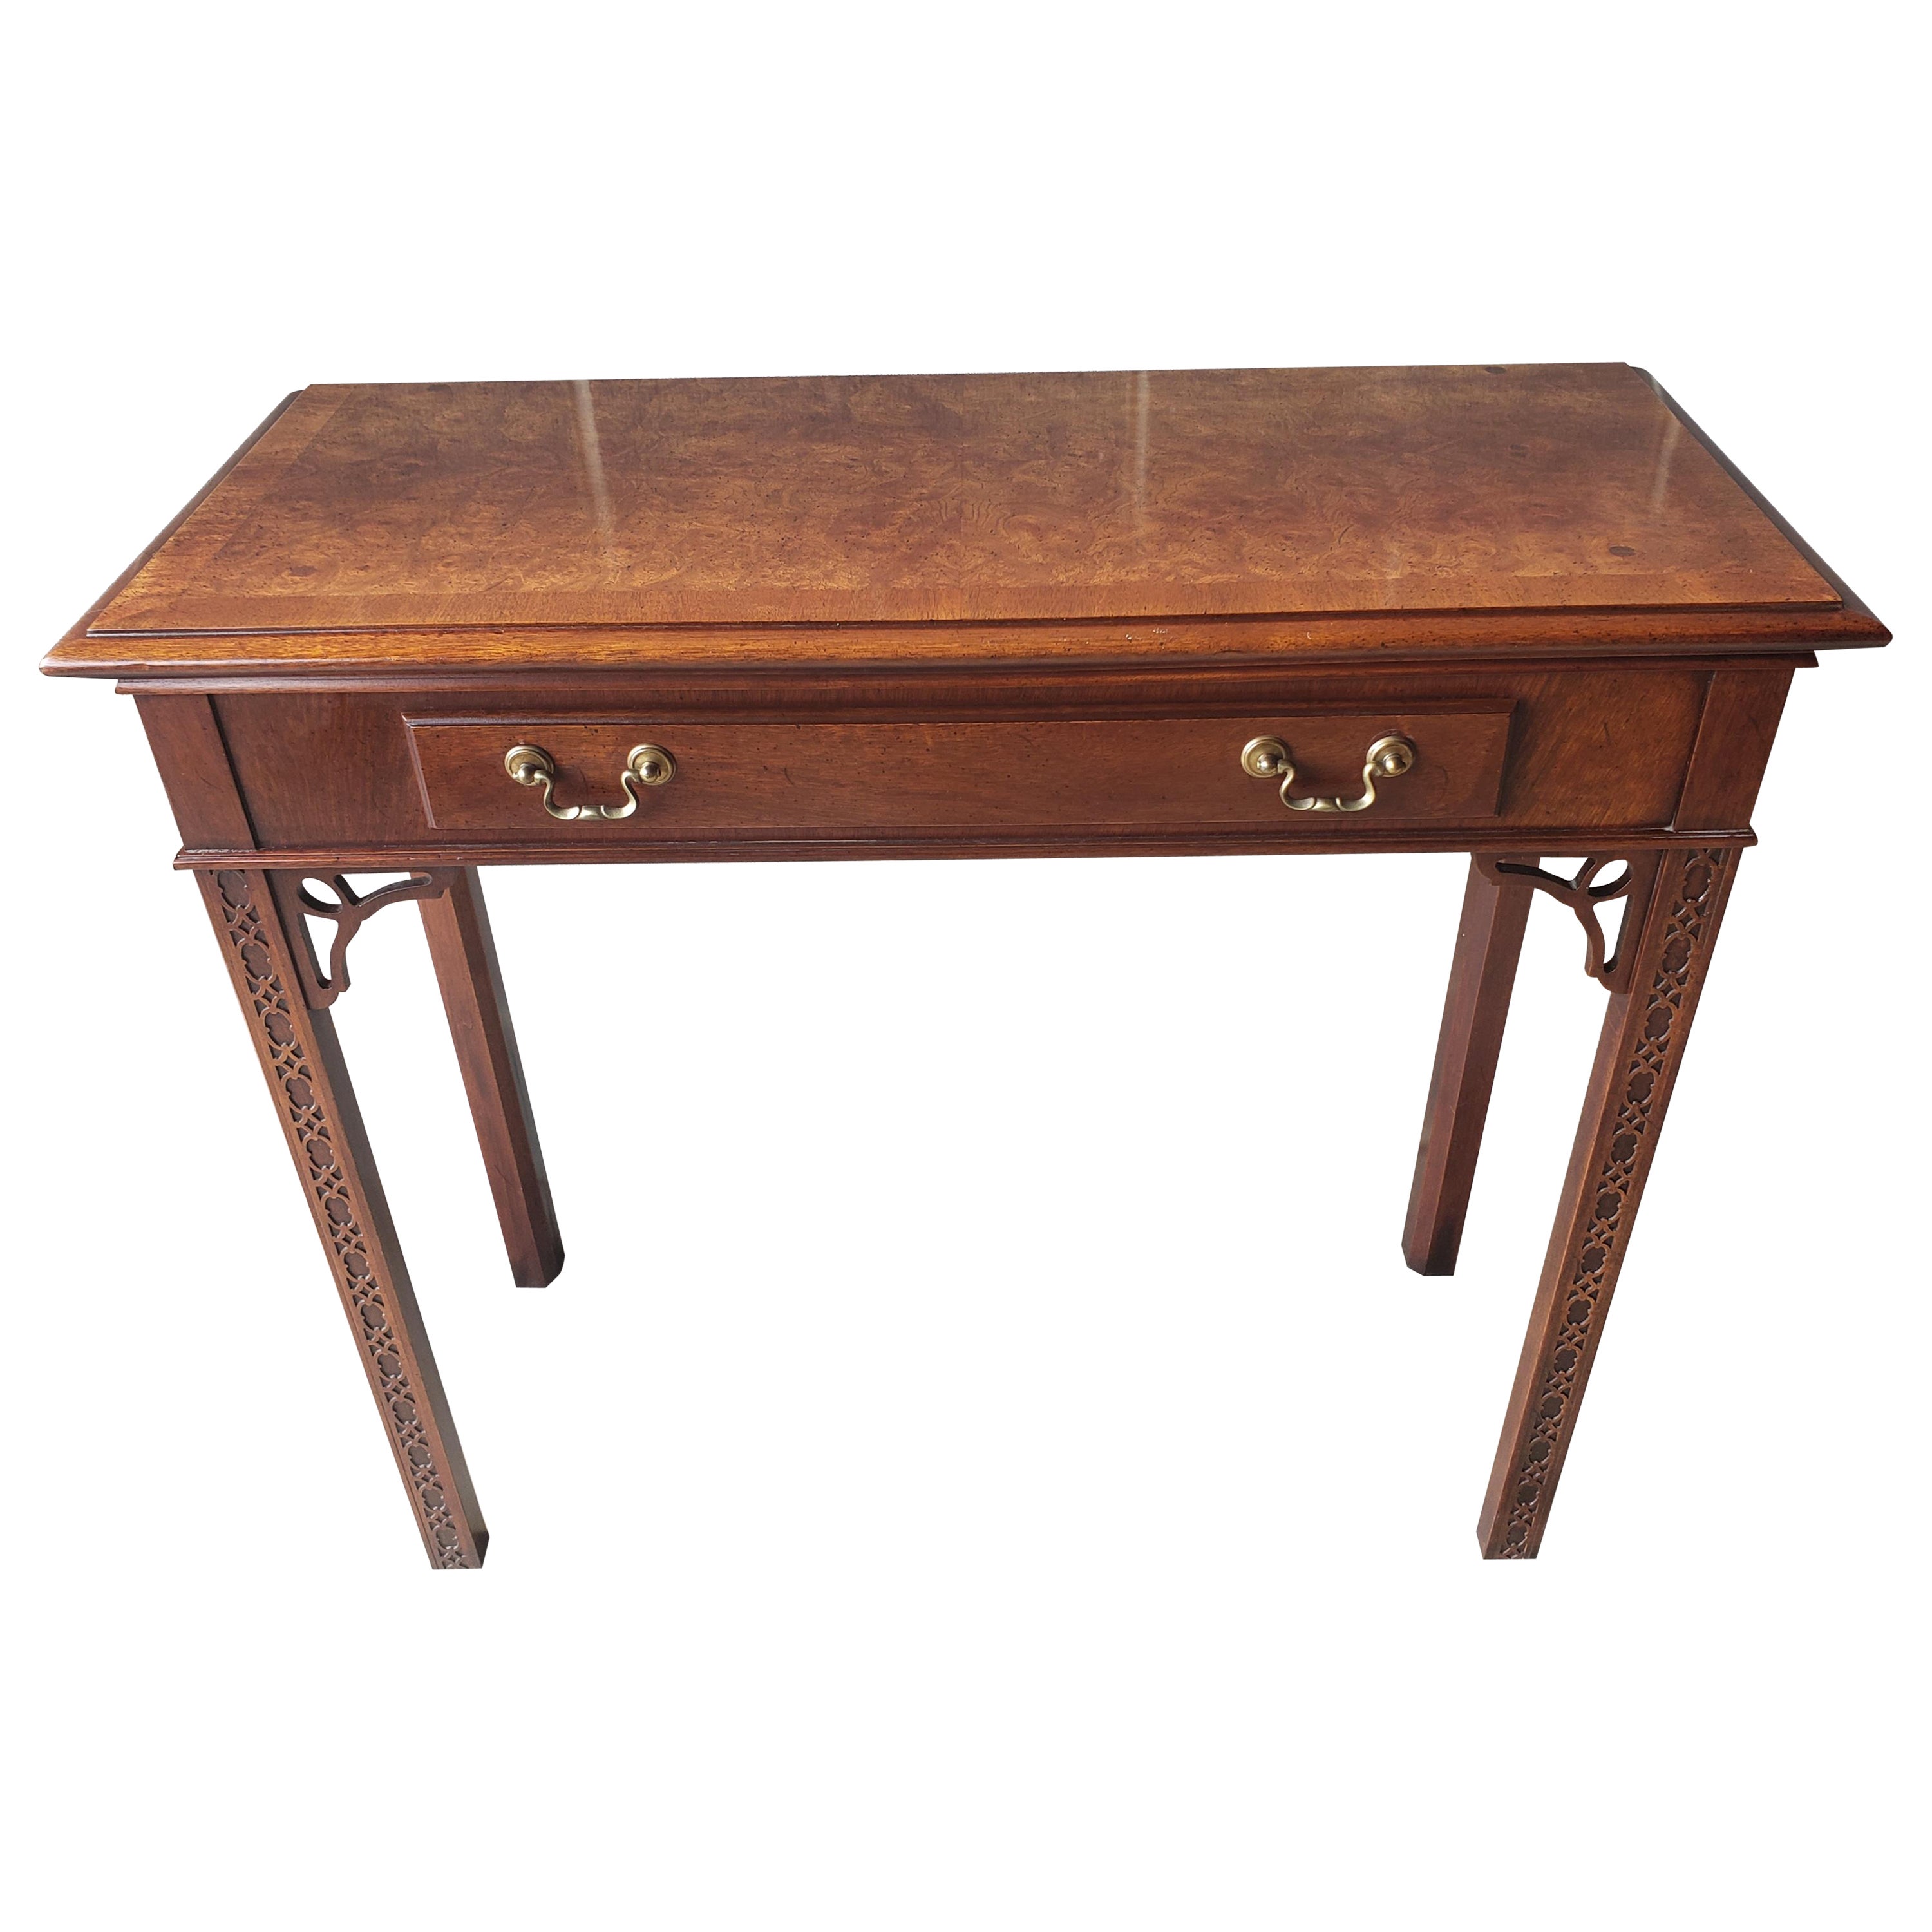 1970s Chippendale Walnut Burl Console Table with Fretwork and Banded Top